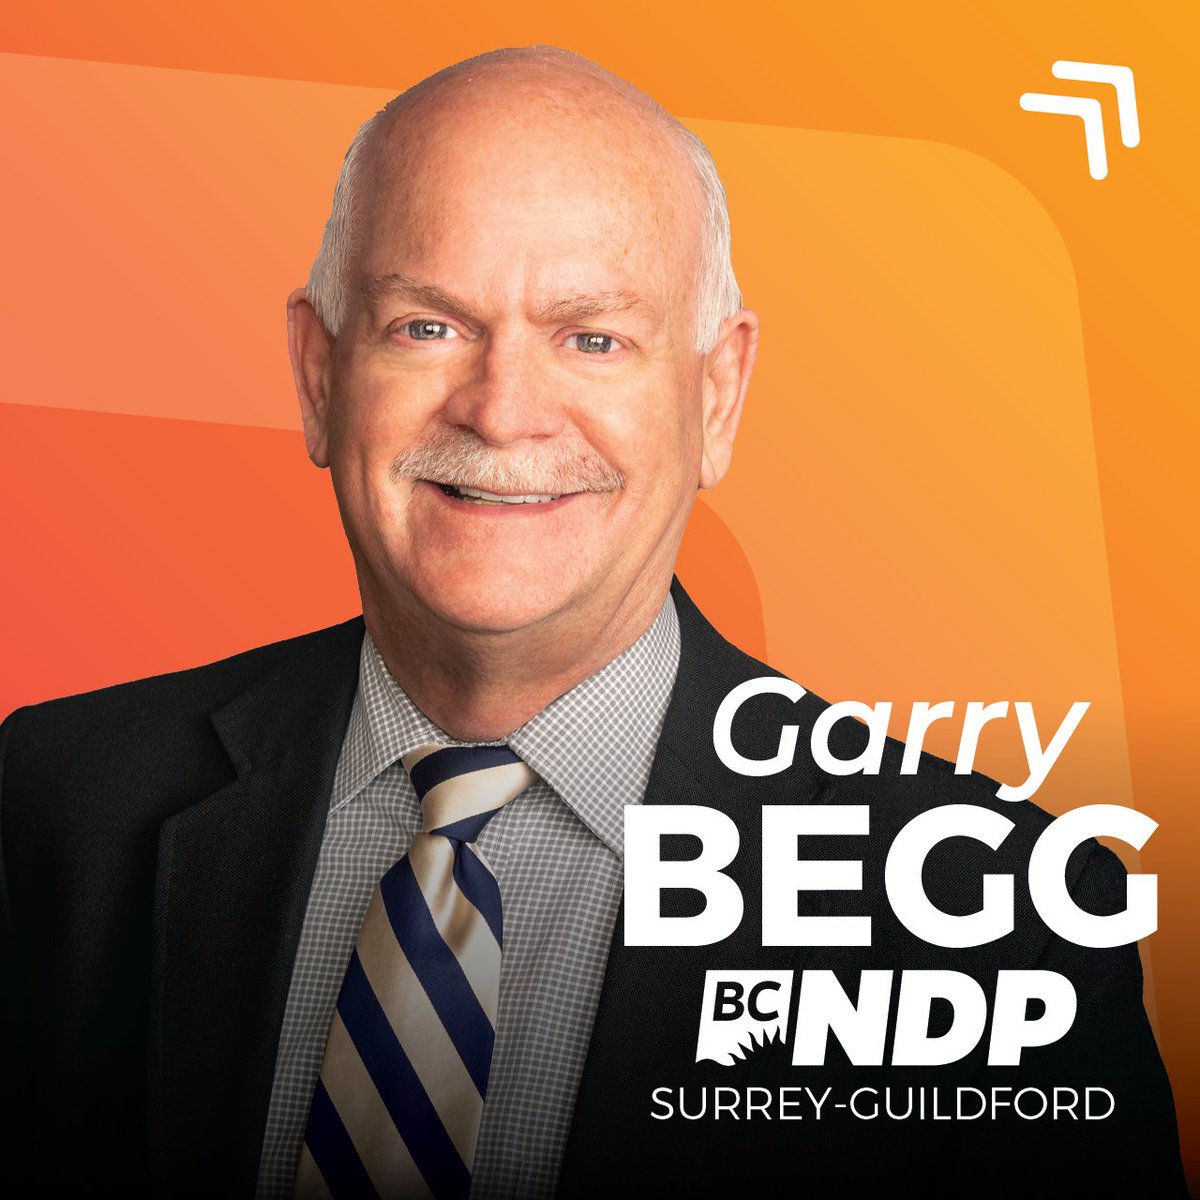 Congratulations to Garry Begg, our BC NDP nominee in Surrey-Guildford. Garry is a twice re-elected MLA with nearly 40 years of experience in progressive law enforcement leadership with the RCMP. Welcome Garry (@garrybeggBC)!